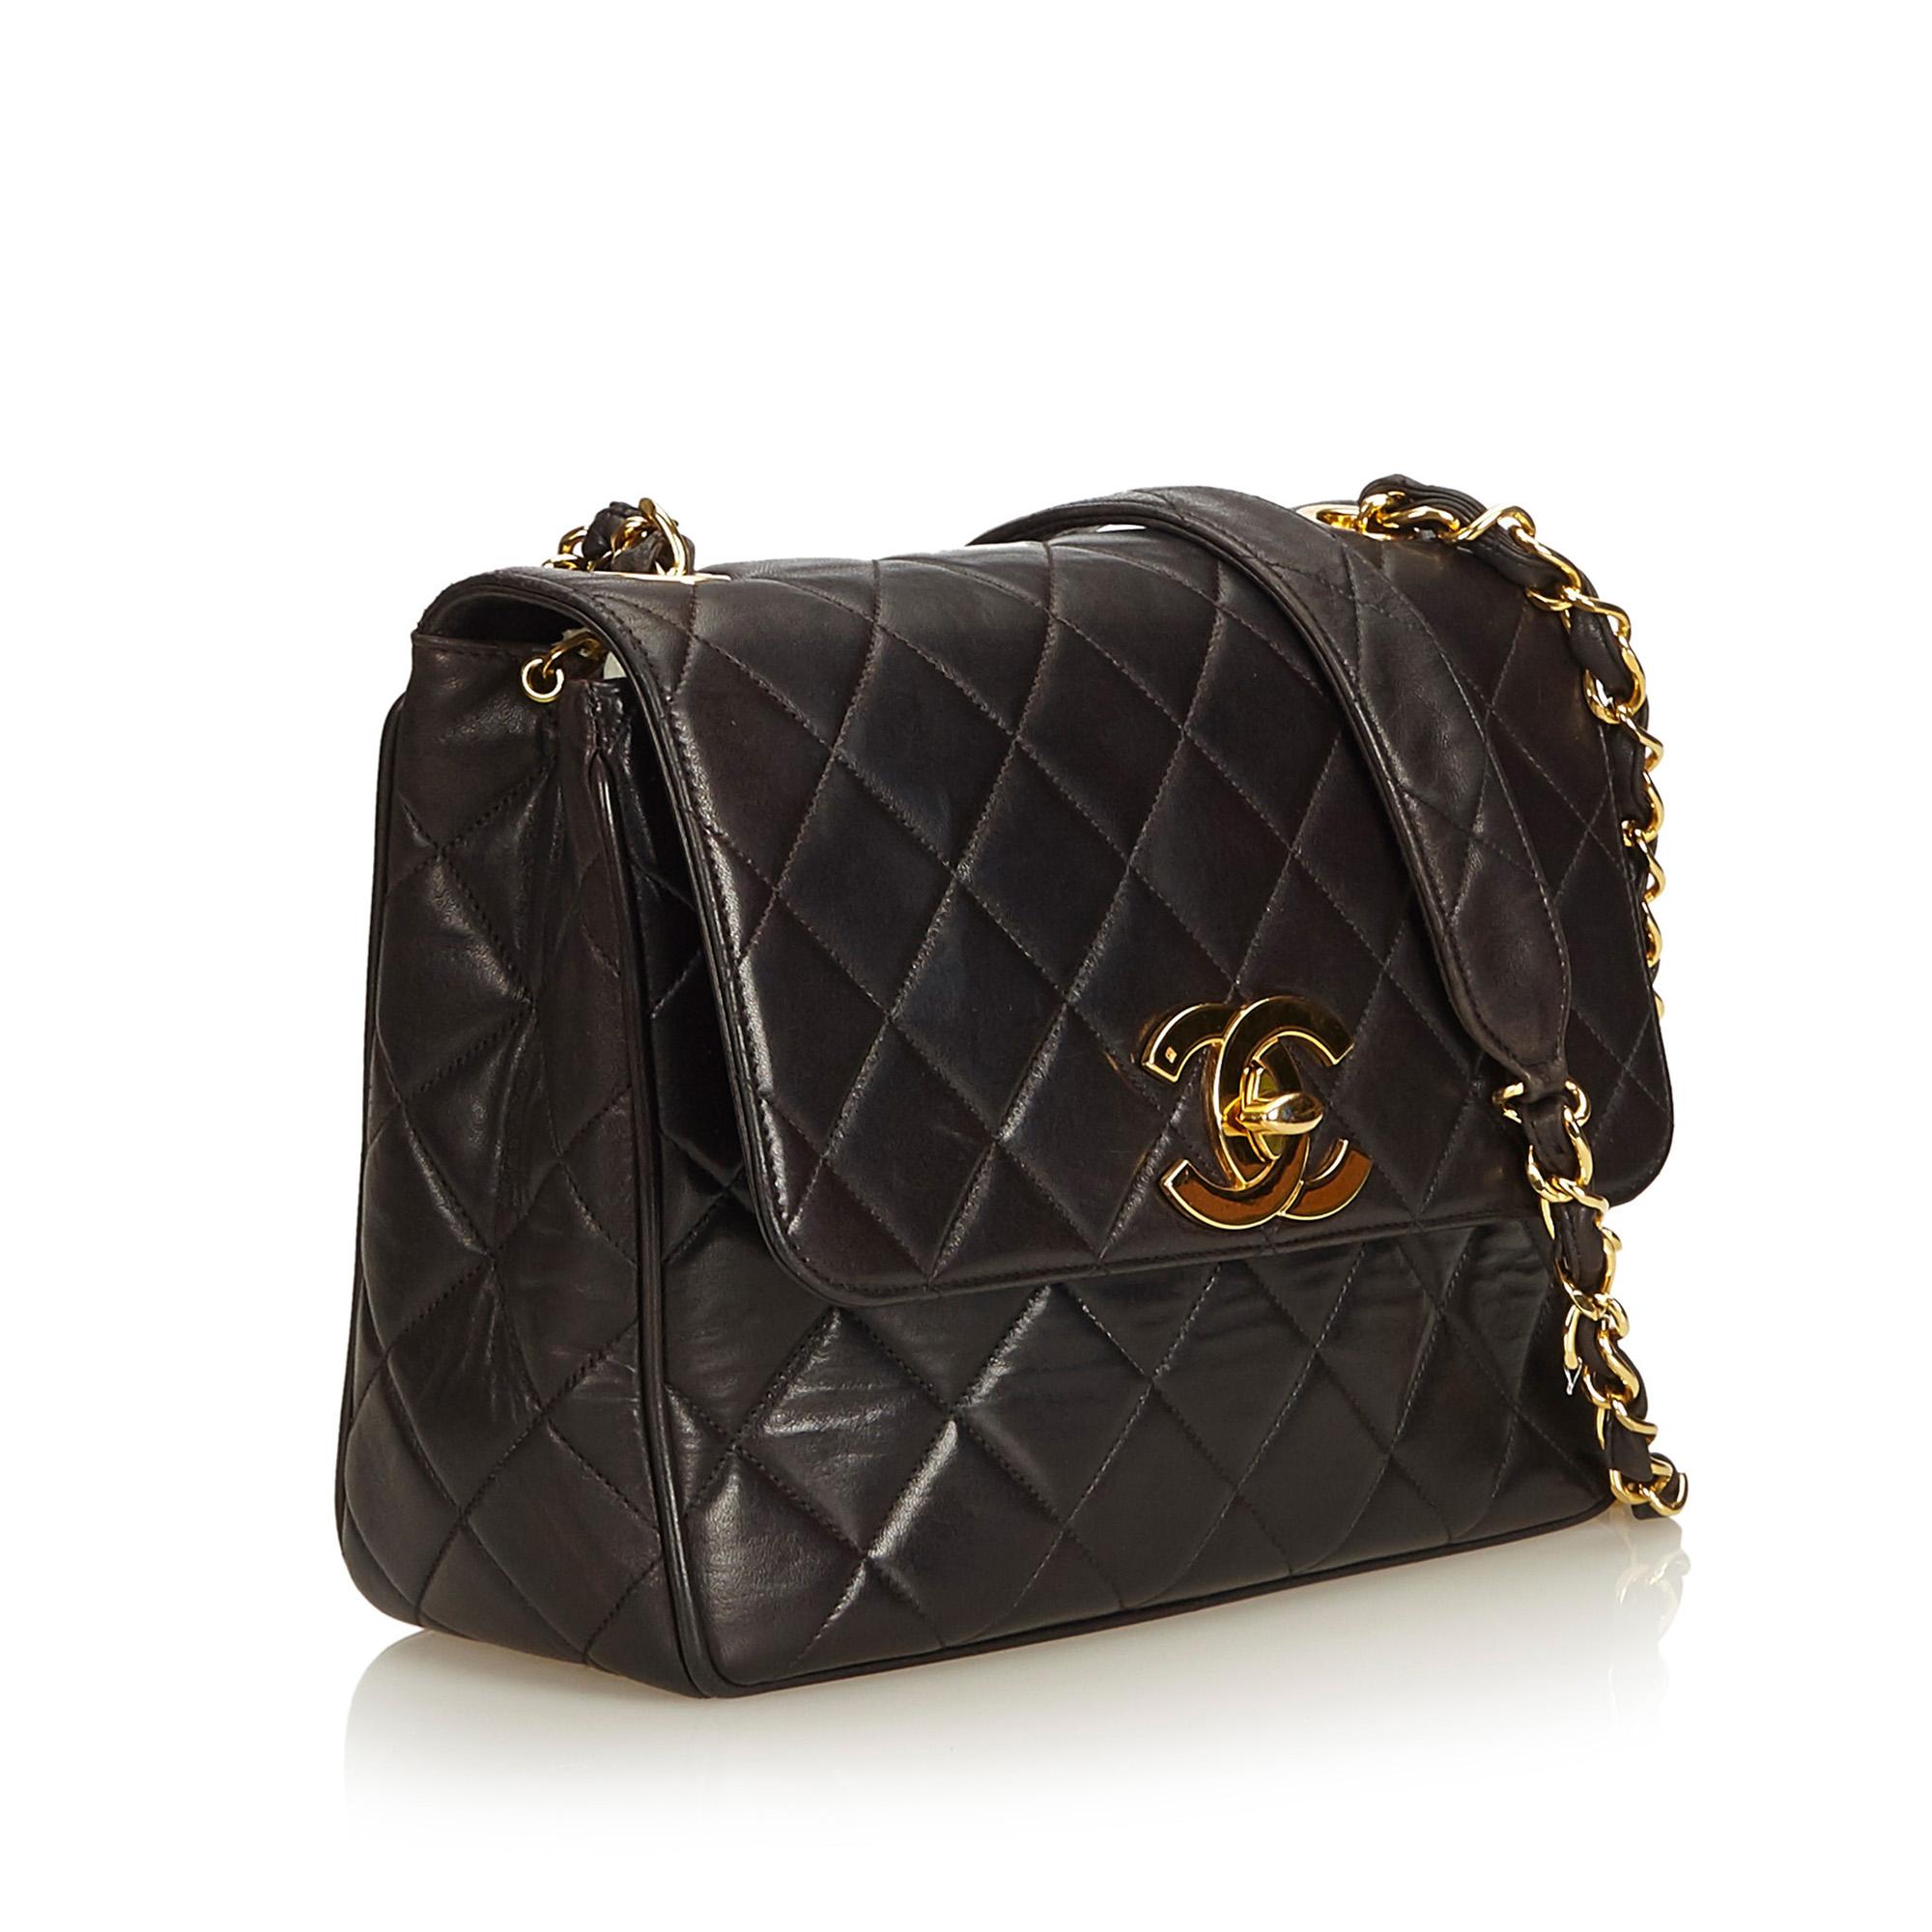 This crossbody bag features a quilted lambskin leather body, chain strap, top flap with interlocking CC twist lock closure, exterior slip pocket, and interior zip and slip pocket. It carries as B+ condition rating.

Inclusions: 
Authenticity